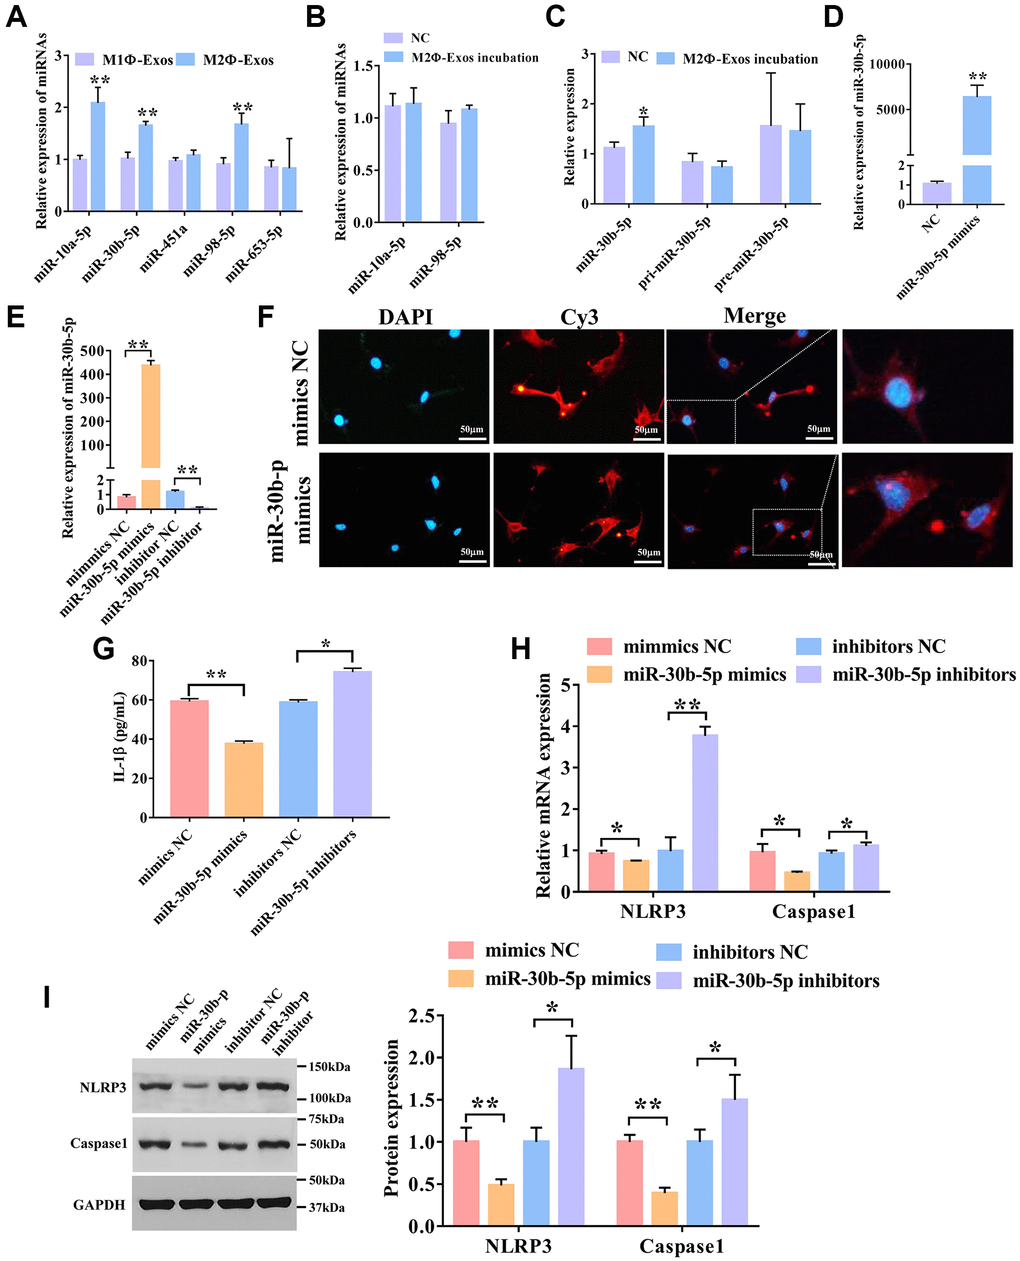 M2Φ-Exos transfer miR-30b-5p to regulate airway epithelial cell pyroptosis. (A) The expression levels of miRNAs in M2Φ-Exos. qRT-PCR was used to detect five candidate miRNAs. U6 was used as an internal control. (n = 3) (B) The expression levels of miRNAs in airway epithelial cells incubated with M2Φ-Exos. (n = 3) (C) The expression level of miR-30b-5p in airway epithelial cells incubated by M2Φ-Exos. (n = 3) (D) The expression level of miR-30b-5p in M2Φ-Exos transfected with miR-30b-5p mimics. (n = 3) (E) Overexpression and interference efficiency of miR-30b-5p were detected by qRT-PCR. (n = 3) (F) M2Φ-Exos containing miR-30b-5p internalization was observed with a fluorescence microscope. Scale bars = 50 μm. (G) The expression level of IL-1β was measured s by ELISA assay in airway epithelial cell. (n = 3) (H) The expression levels of NLRP3 and caspase-1 were determined by qPCR. (n = 3) (I) The protein expression level of NLRP3 and caspase-1 was detected by Western blotting. *P **P 